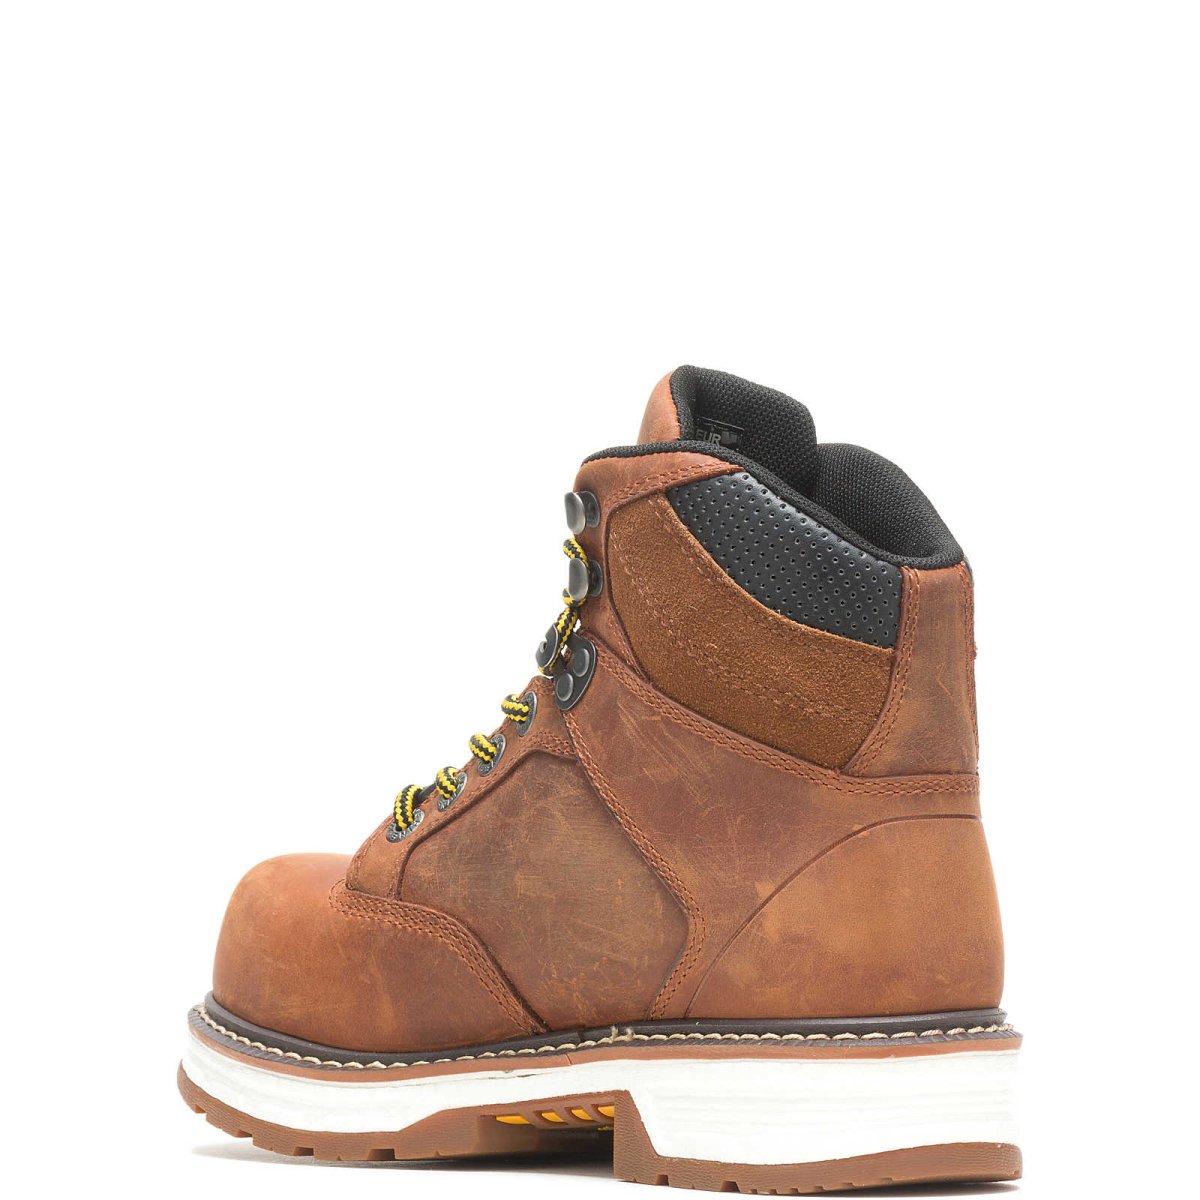 WOLVERINE HELLCAT WOMEN'S SAFETY TOE WORK BOOT (W211155) IN BROWN - TLW Shoes